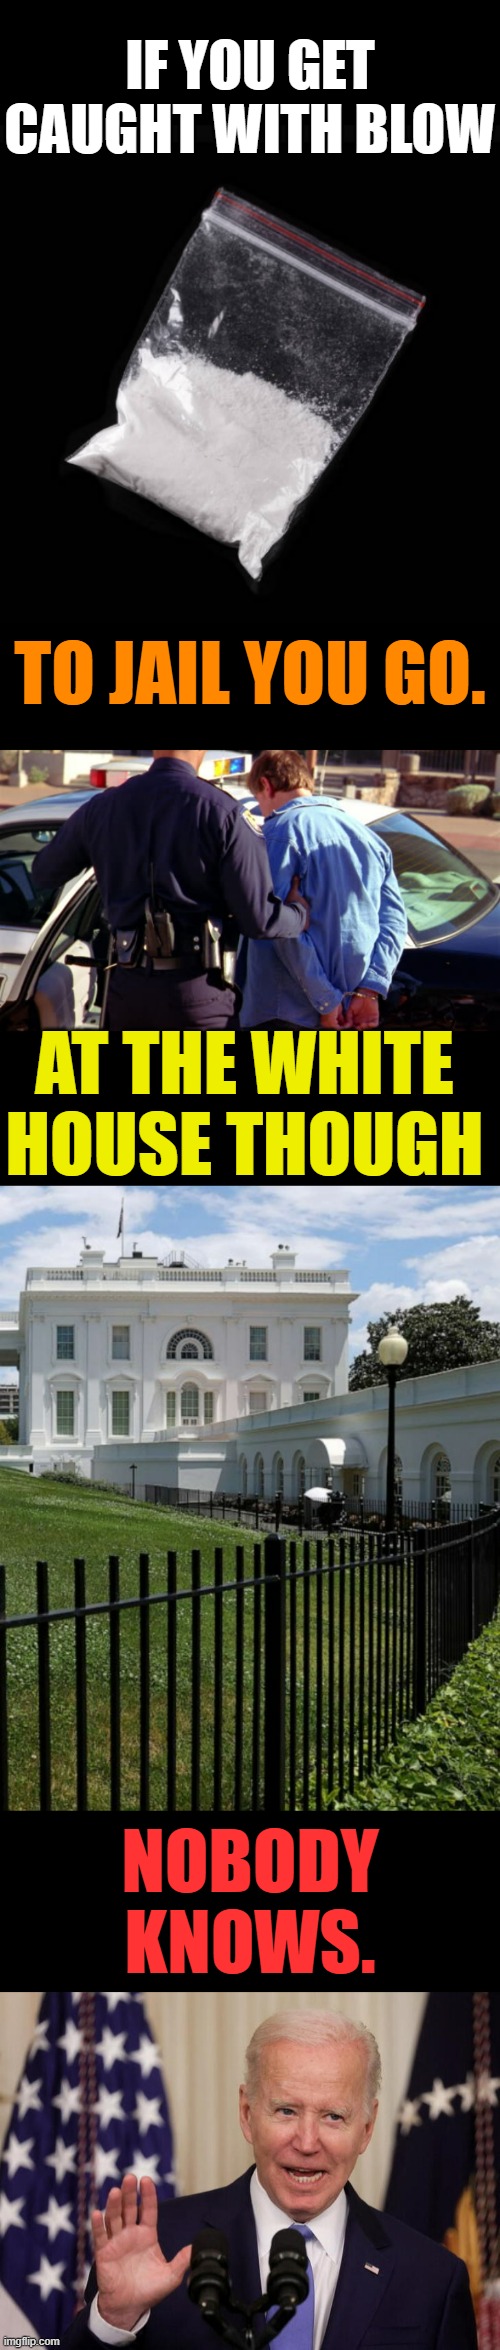 Oh How They Lie To Us | IF YOU GET CAUGHT WITH BLOW; TO JAIL YOU GO. AT THE WHITE HOUSE THOUGH; NOBODY KNOWS. | image tagged in memes,politics,cocaine,jail,white house,nobody cares | made w/ Imgflip meme maker